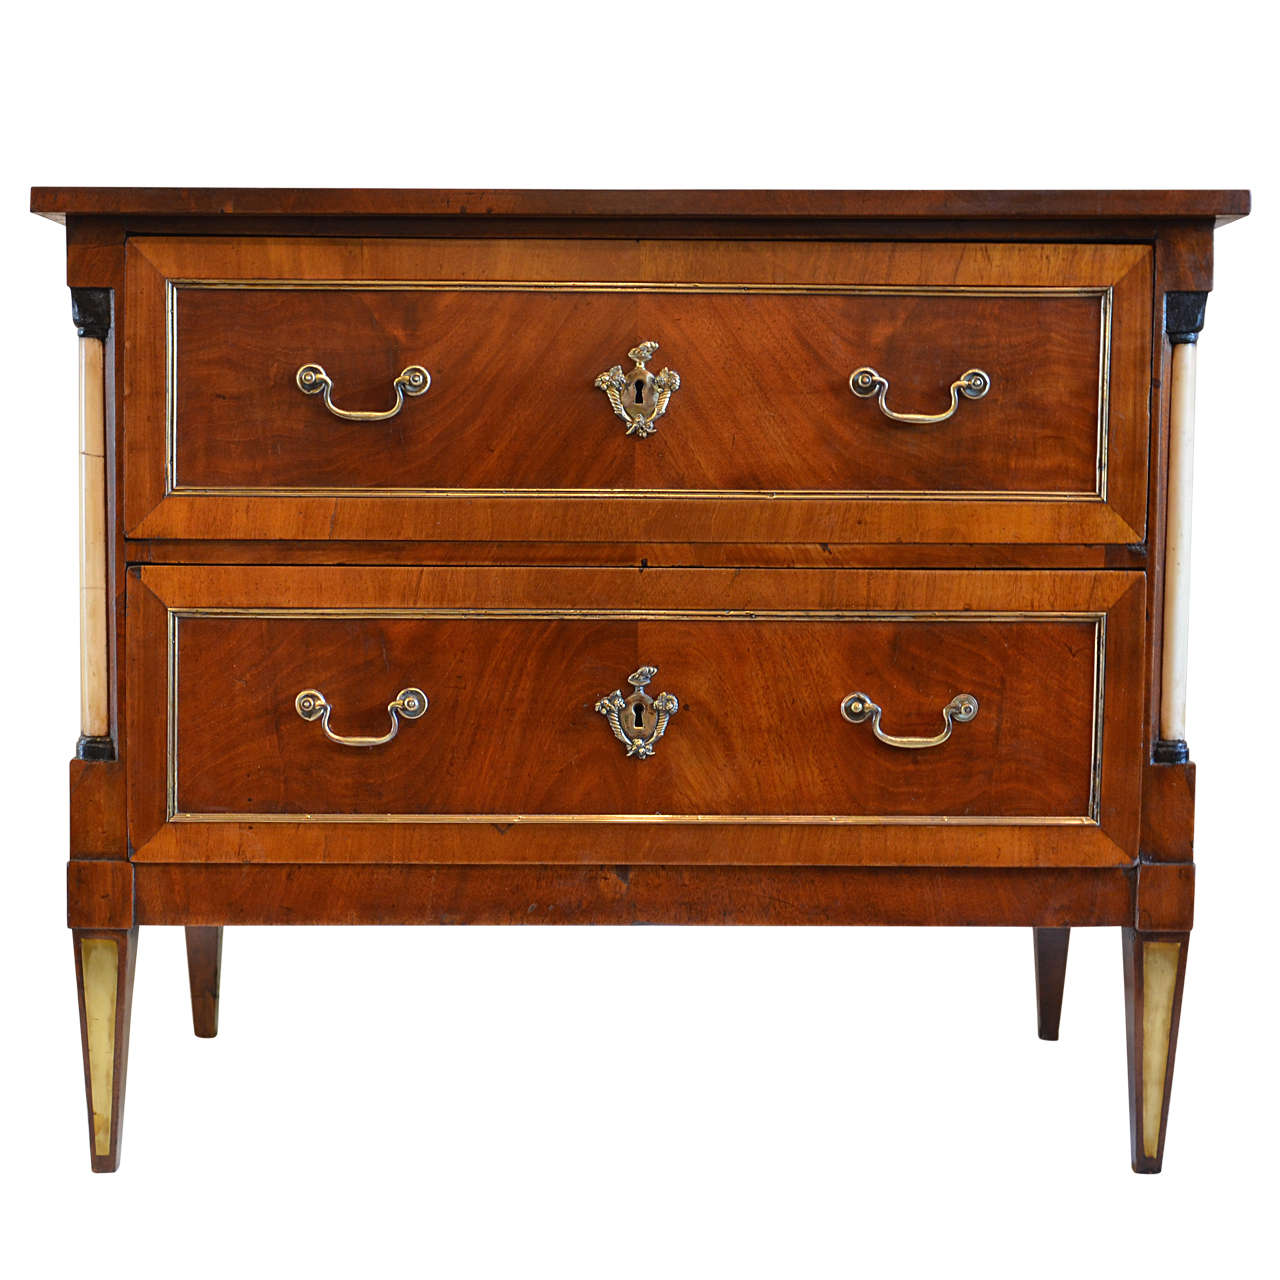 1820s Mahogany German Biedermeier Commode with Two Drawers and Alabaster Columns